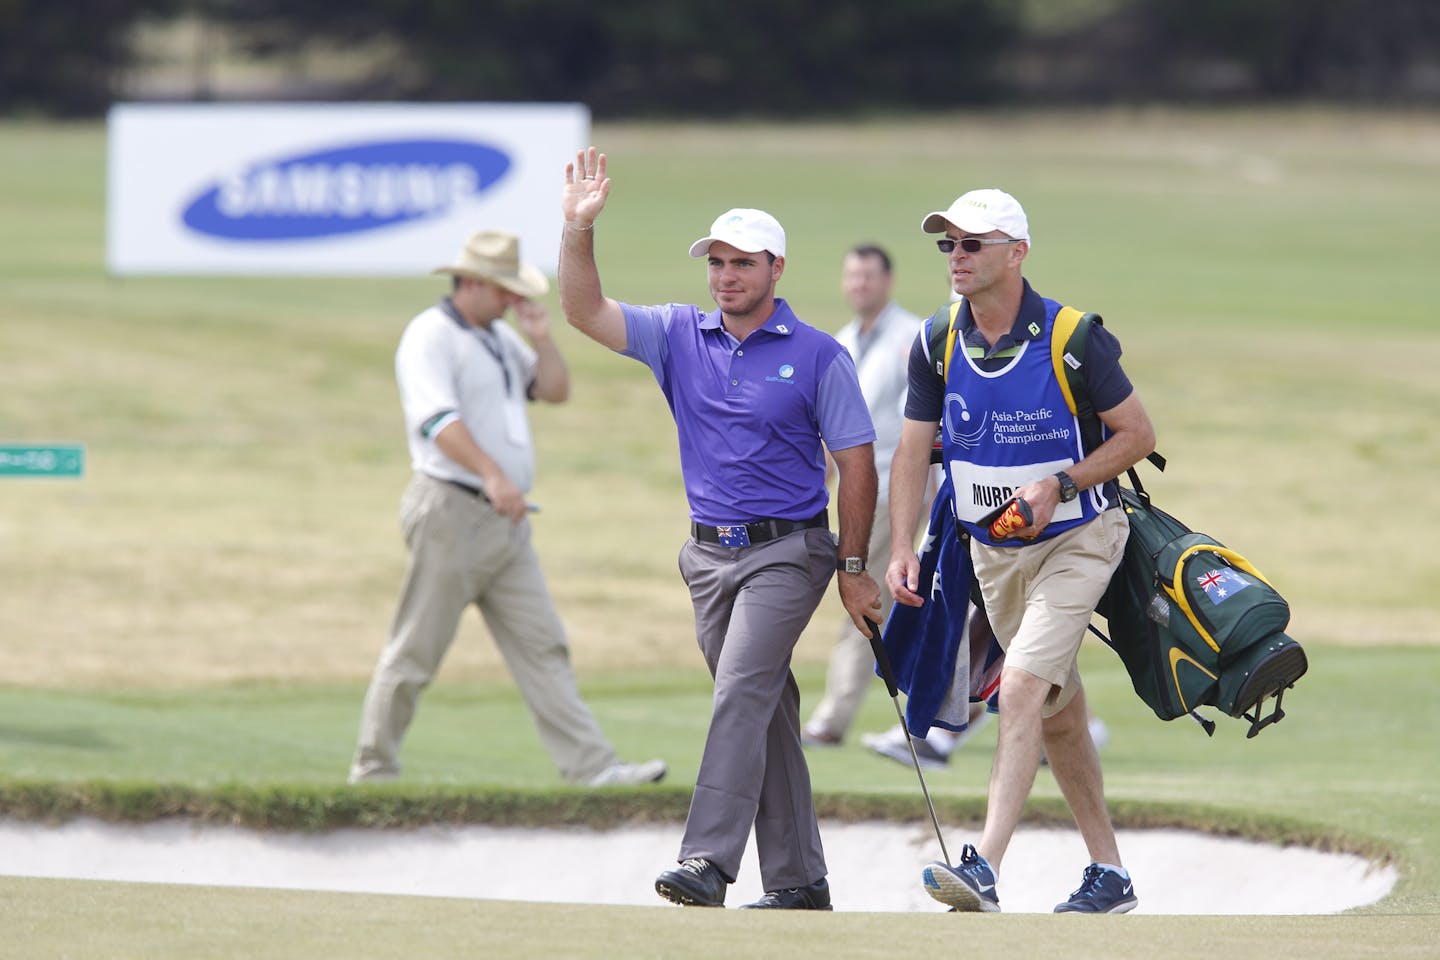 Melbourne, Australia: 2014 Asia-Pacific Amateur champion Antonio Murdaca of Australia acknowledges the applause on the 18th hole the Asia-Pacific Amateur Championship at the Royal Melbourne Golf Club). October 26 2014, (photo by Dave Tease/AAC)